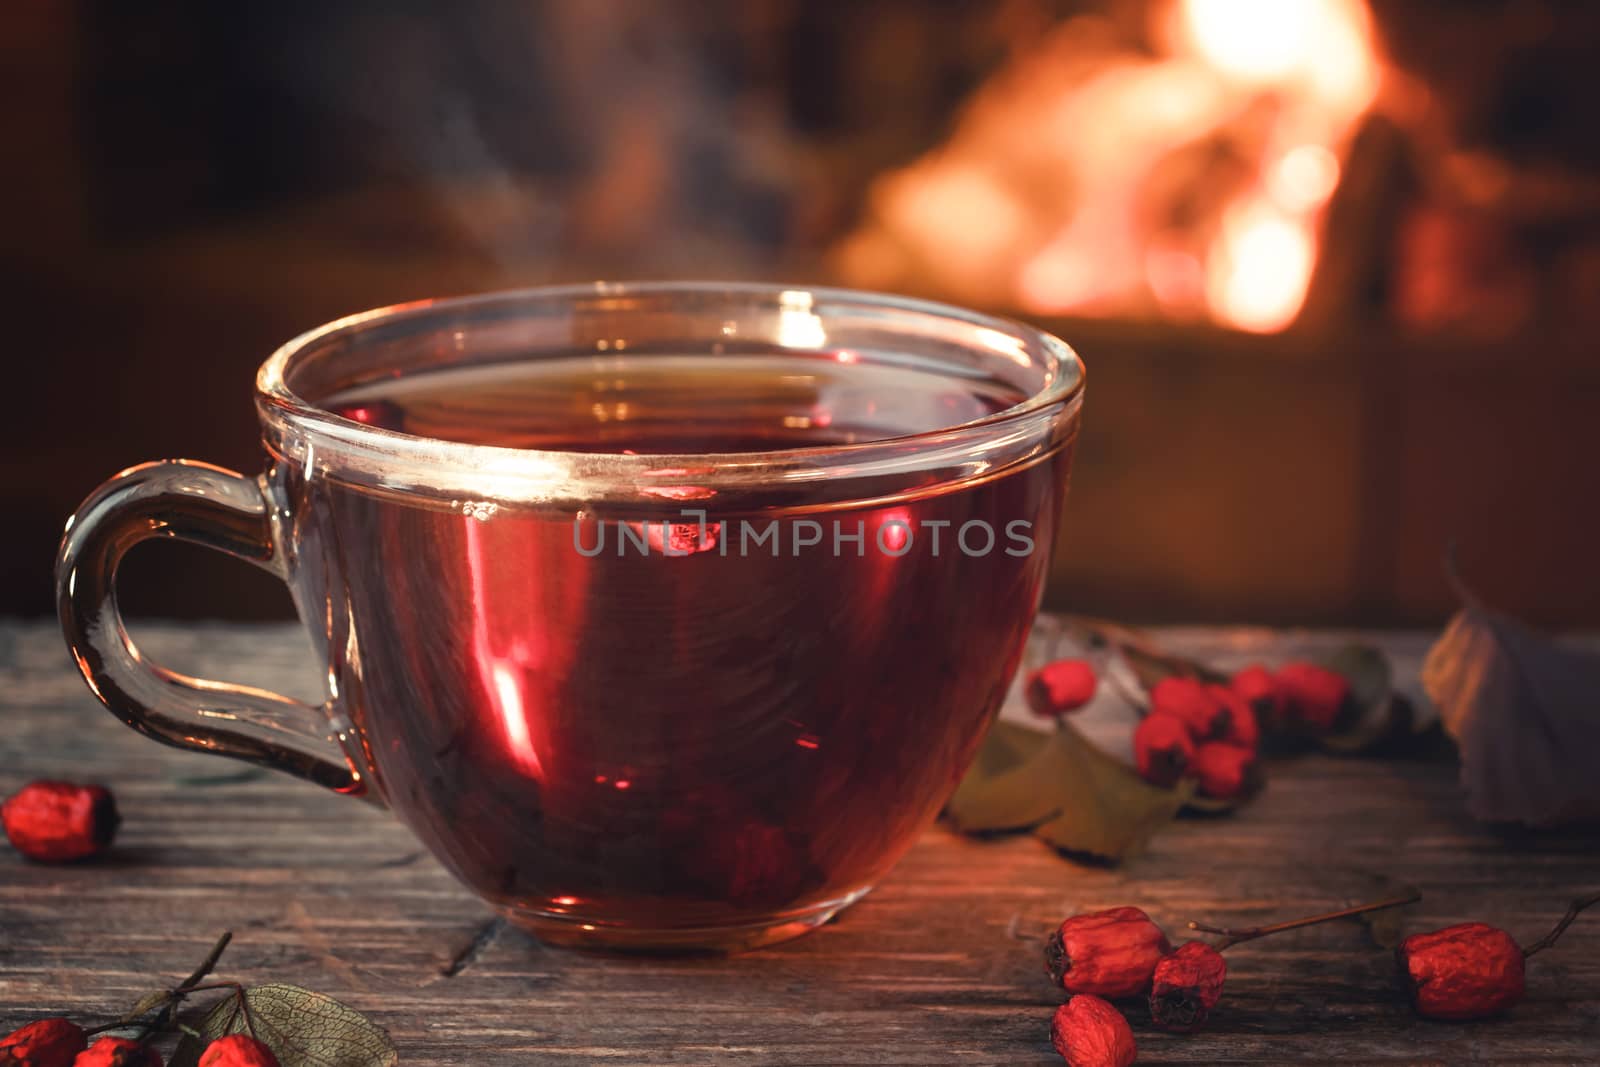 Tea with hawthorn in a glass cup on a wooden table in a room with a burning fireplace.